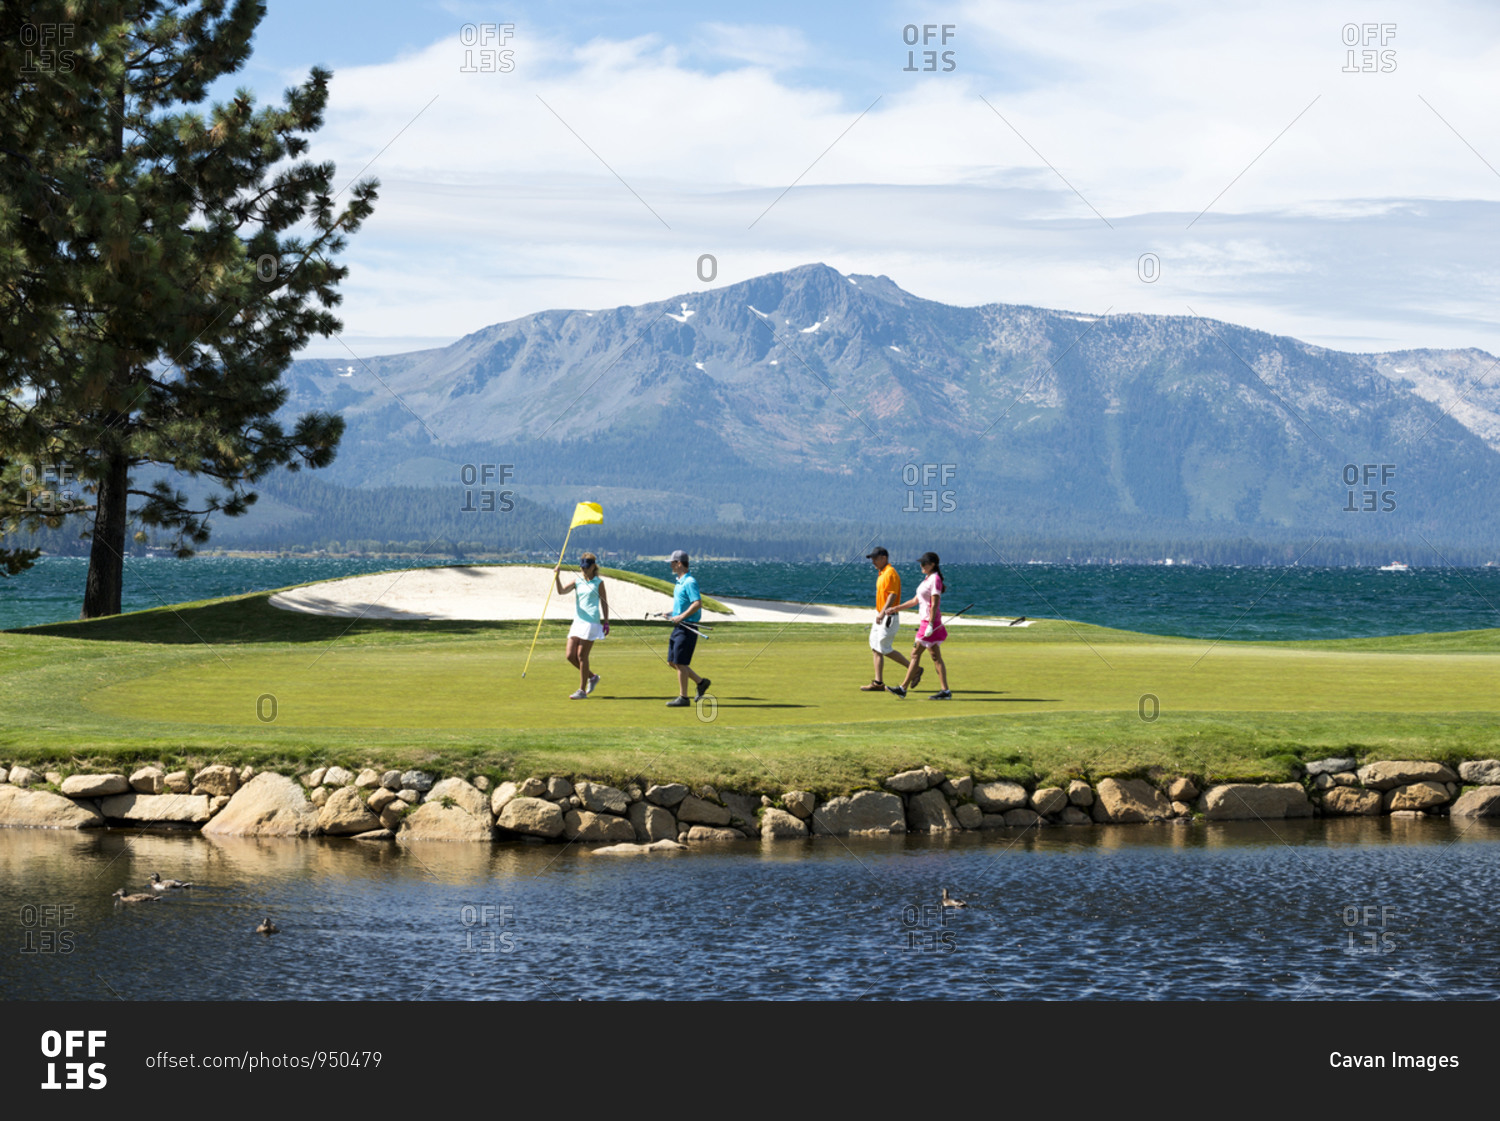 A group of friends golfing at Edgewood Tahoe in Stateline, Nevada.